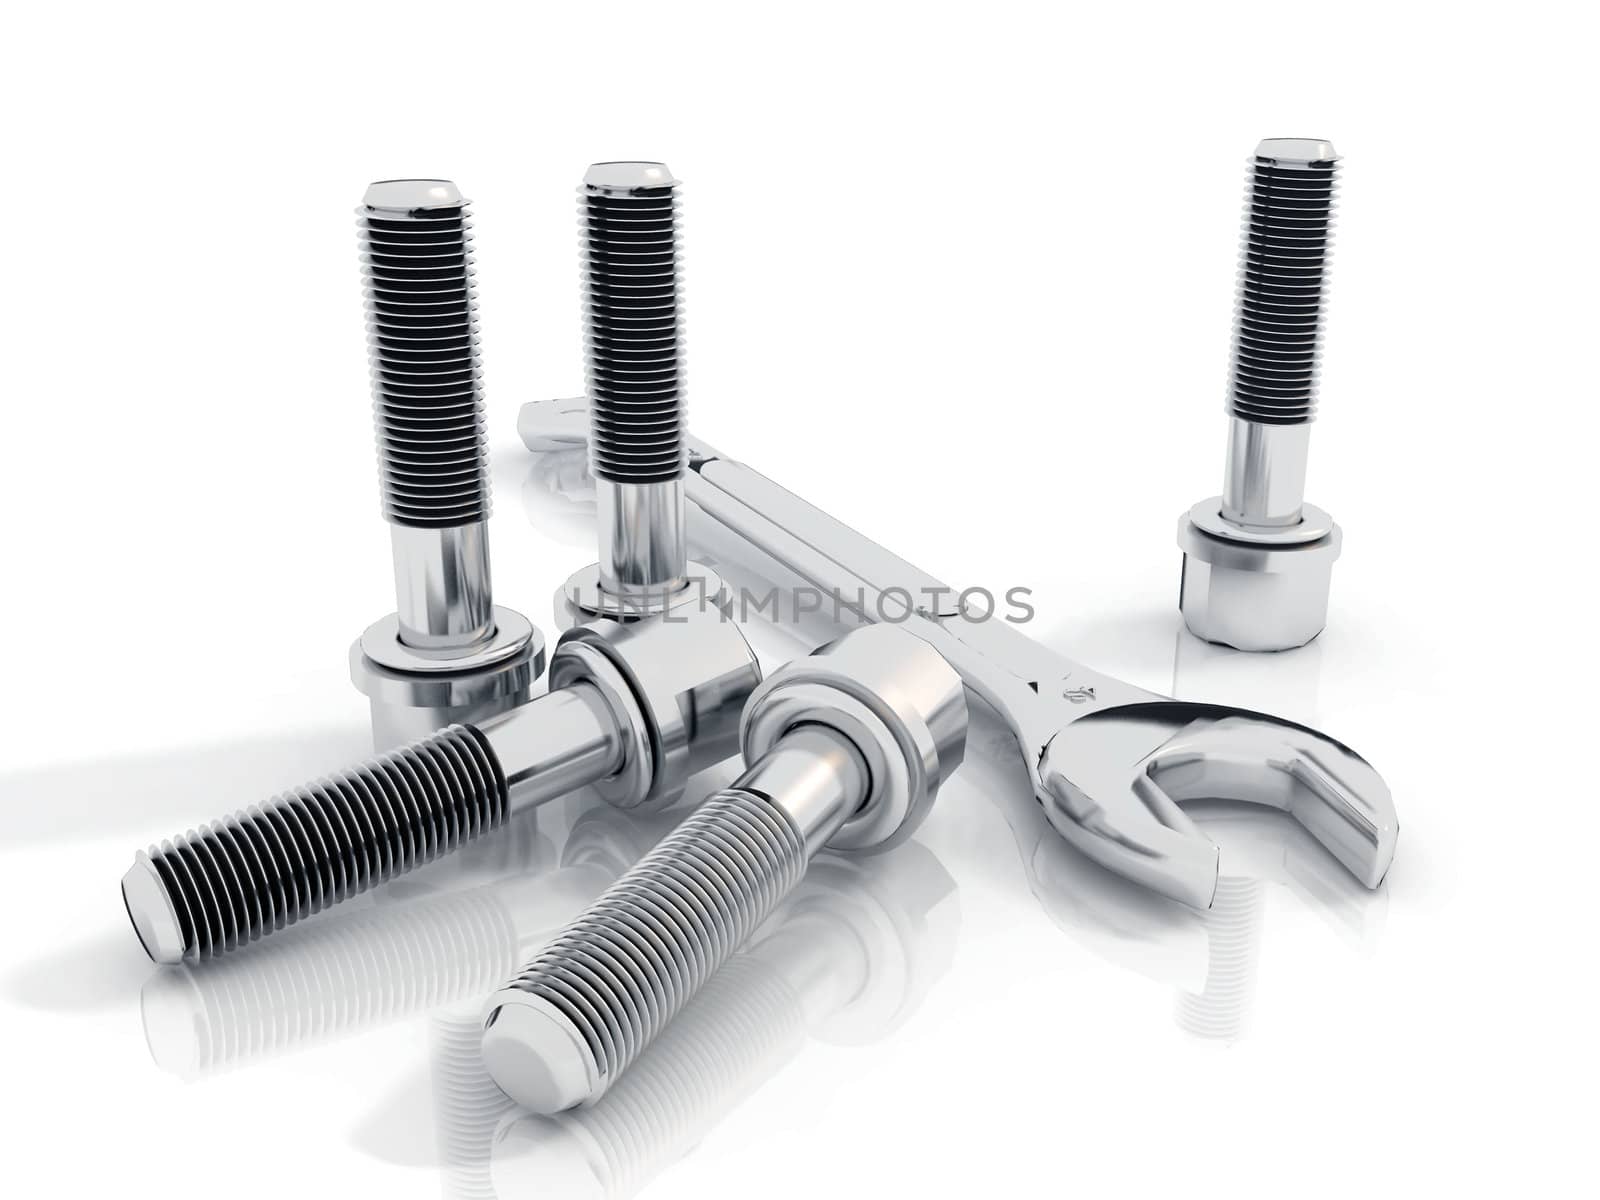 bolts  and wrench on white background by njaj